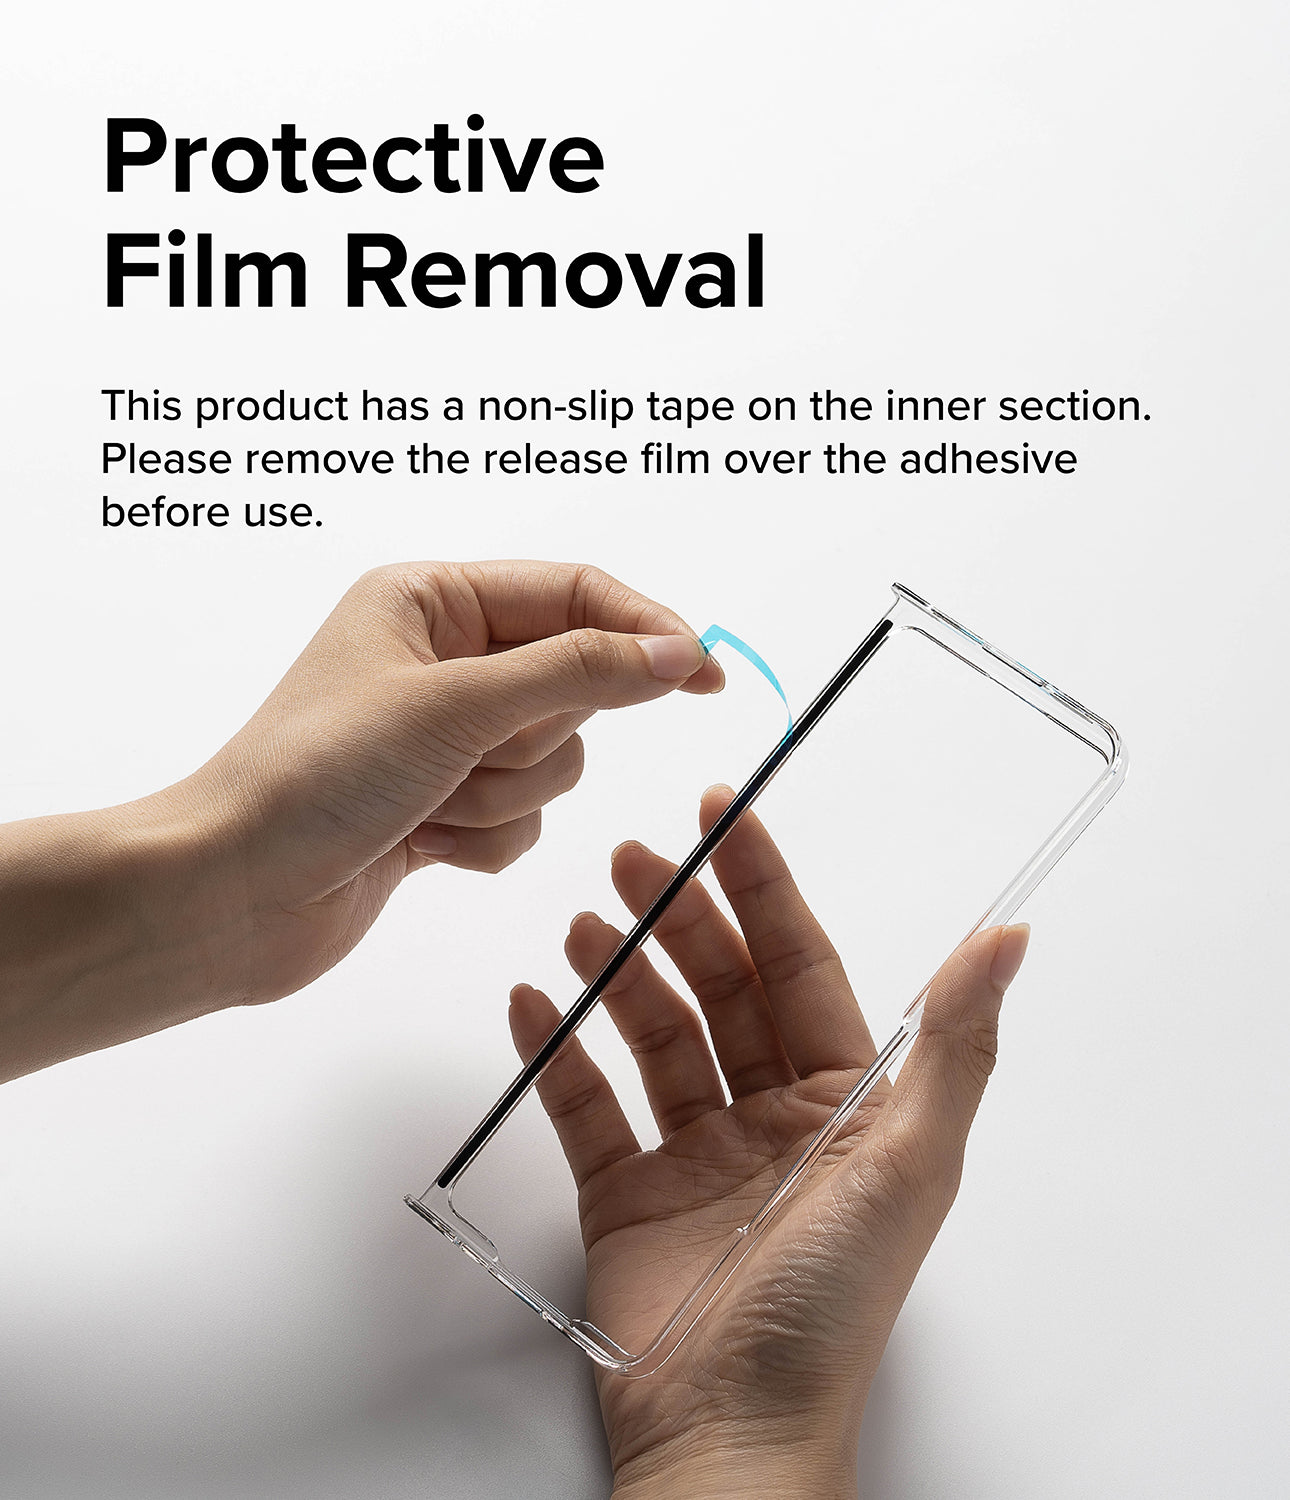 Galaxy Z Fold 5 Case | Slim Hinge - Protective Film Removal. This product has a non-slip tape on the inner section. Please remove the release film over the adhesive before use.